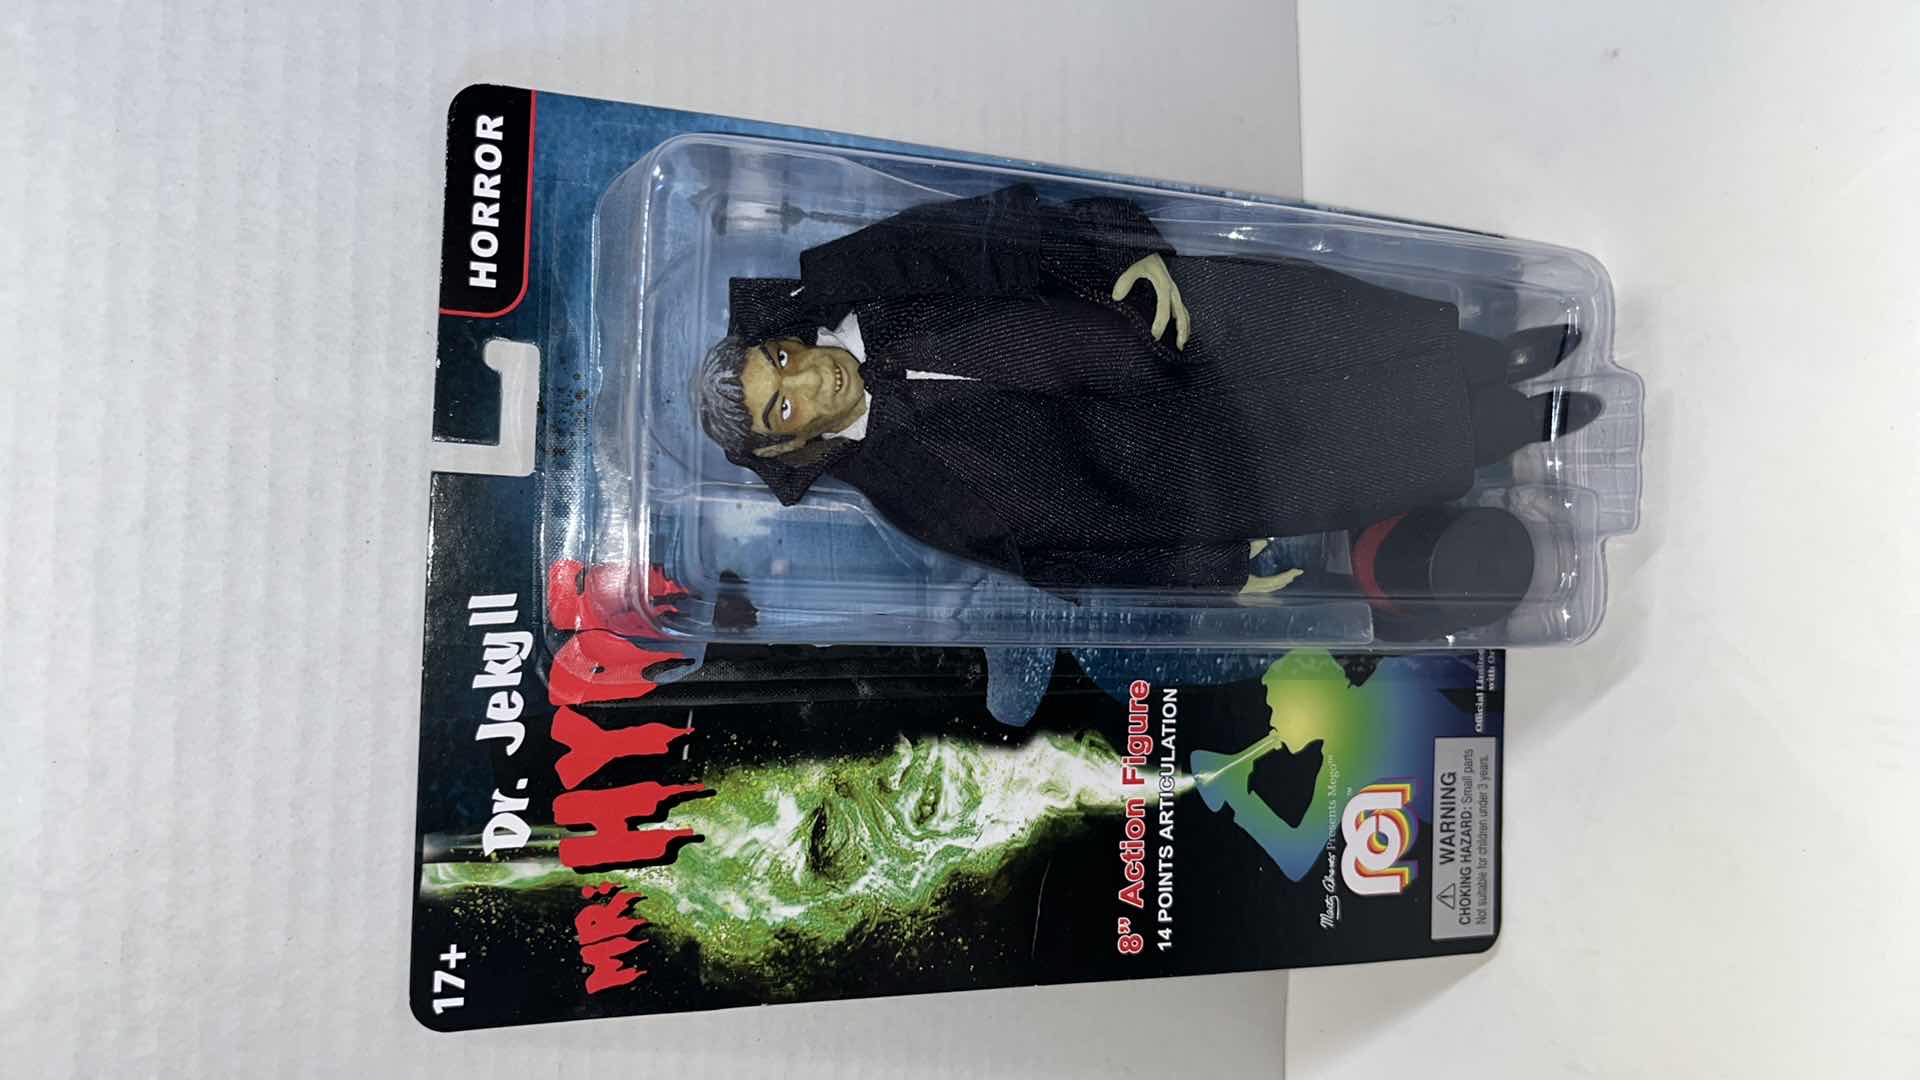 Photo 4 of NIB WORLDS GREATEST MEGO MONSTERS 8” ACTION FIGURE, CREATURE FROM THE BLACK LAGOON & DR. JEKYLL MR. HYDE (2)